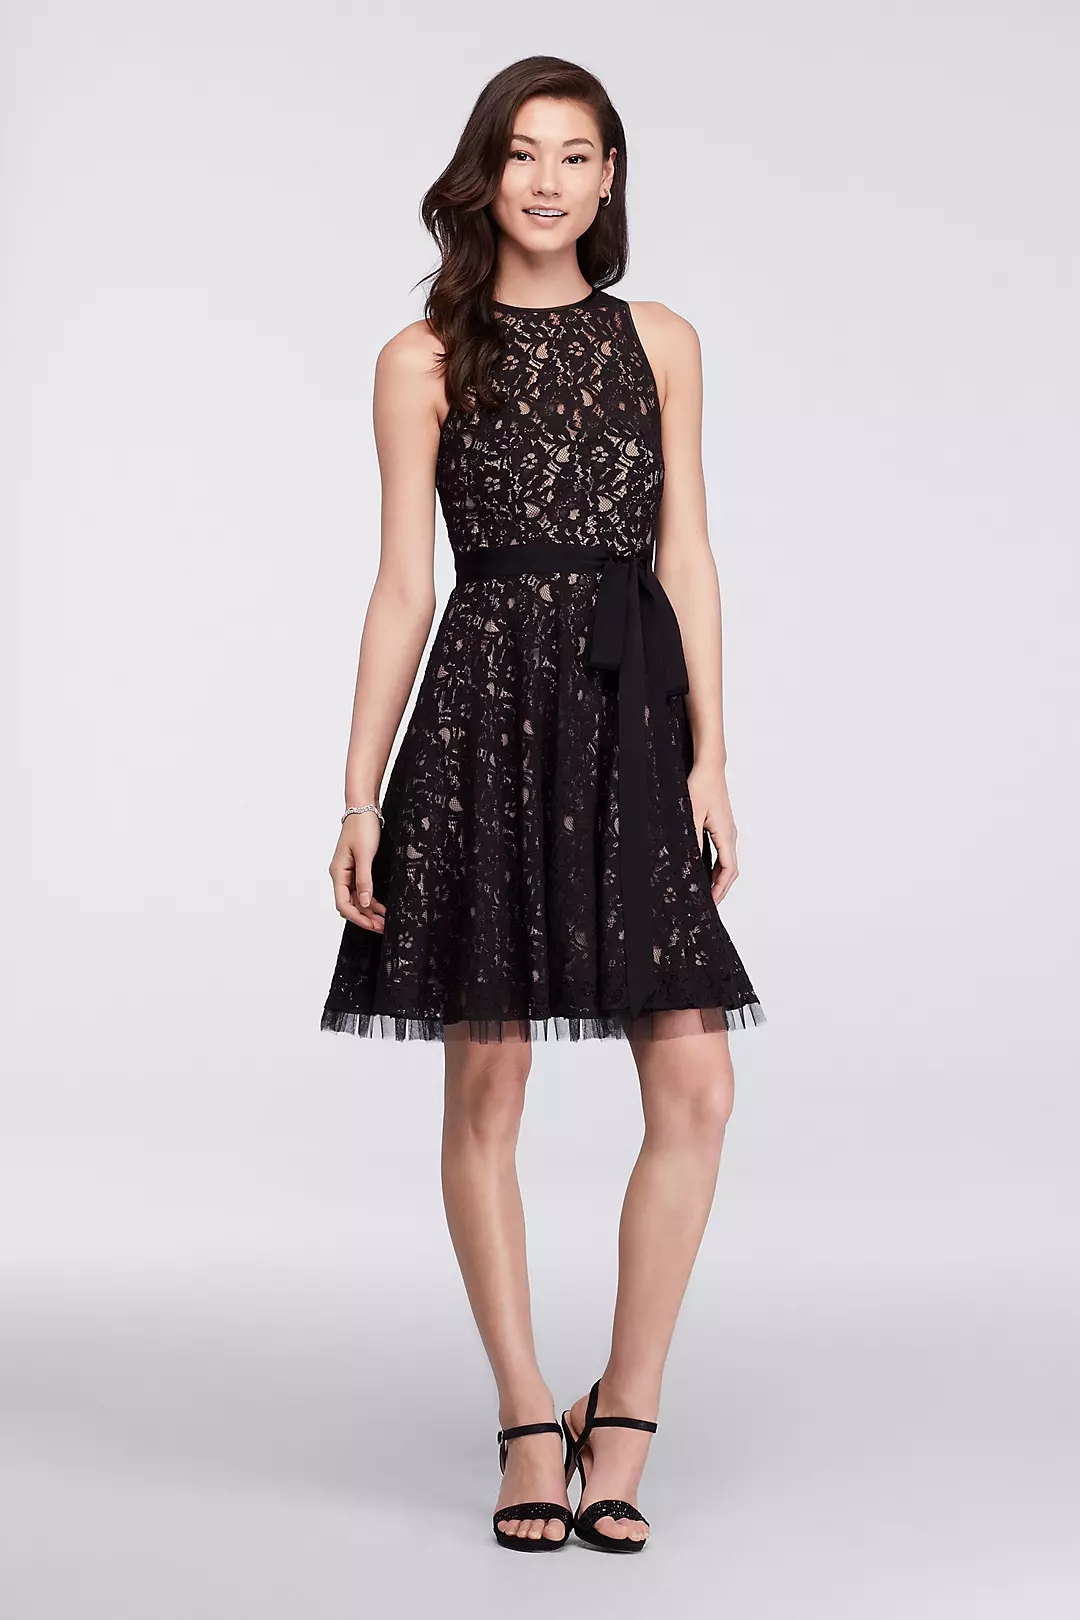 Short Lace Dress with Illusion Neckline and Sash Image